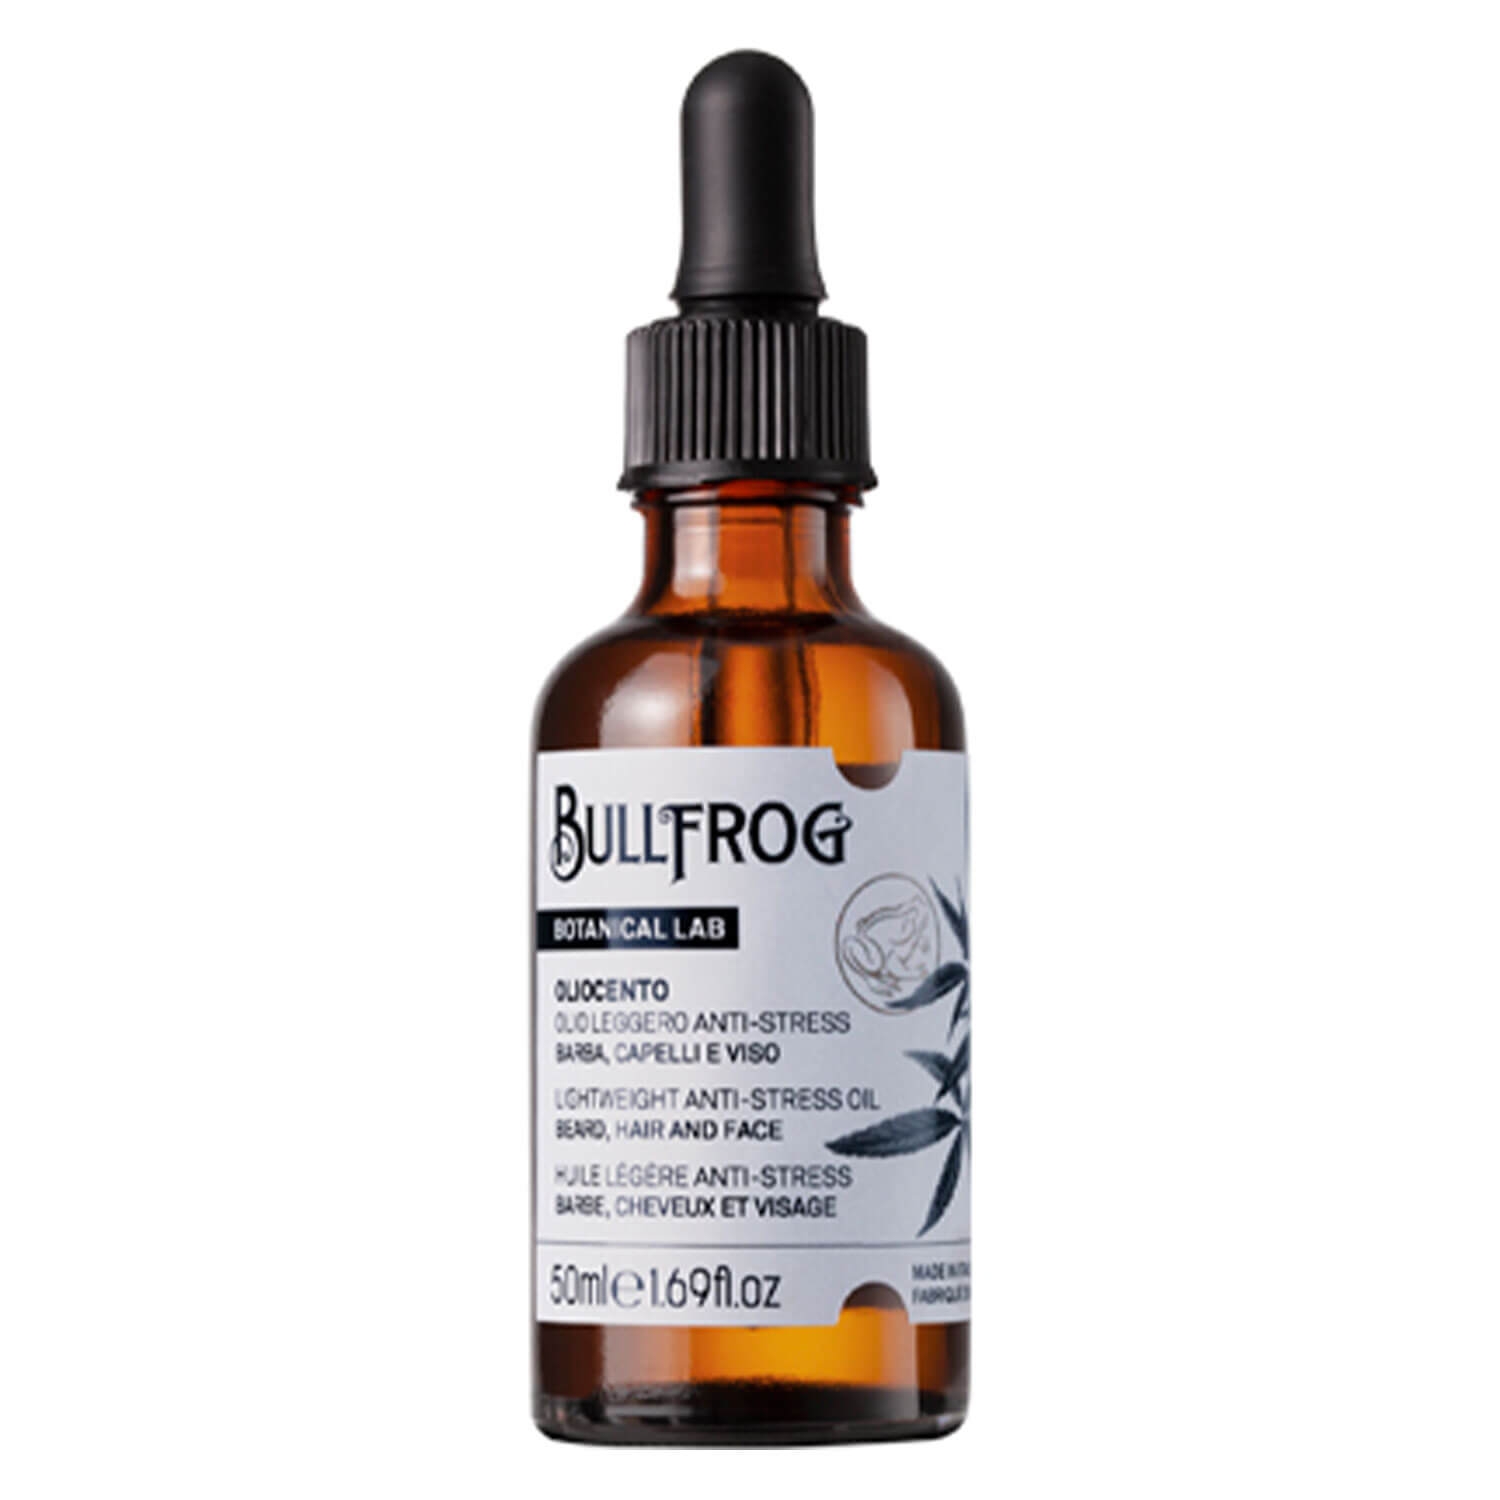 Product image from BULLFROG - Oliocento Lightweight Anti-Stress Oil